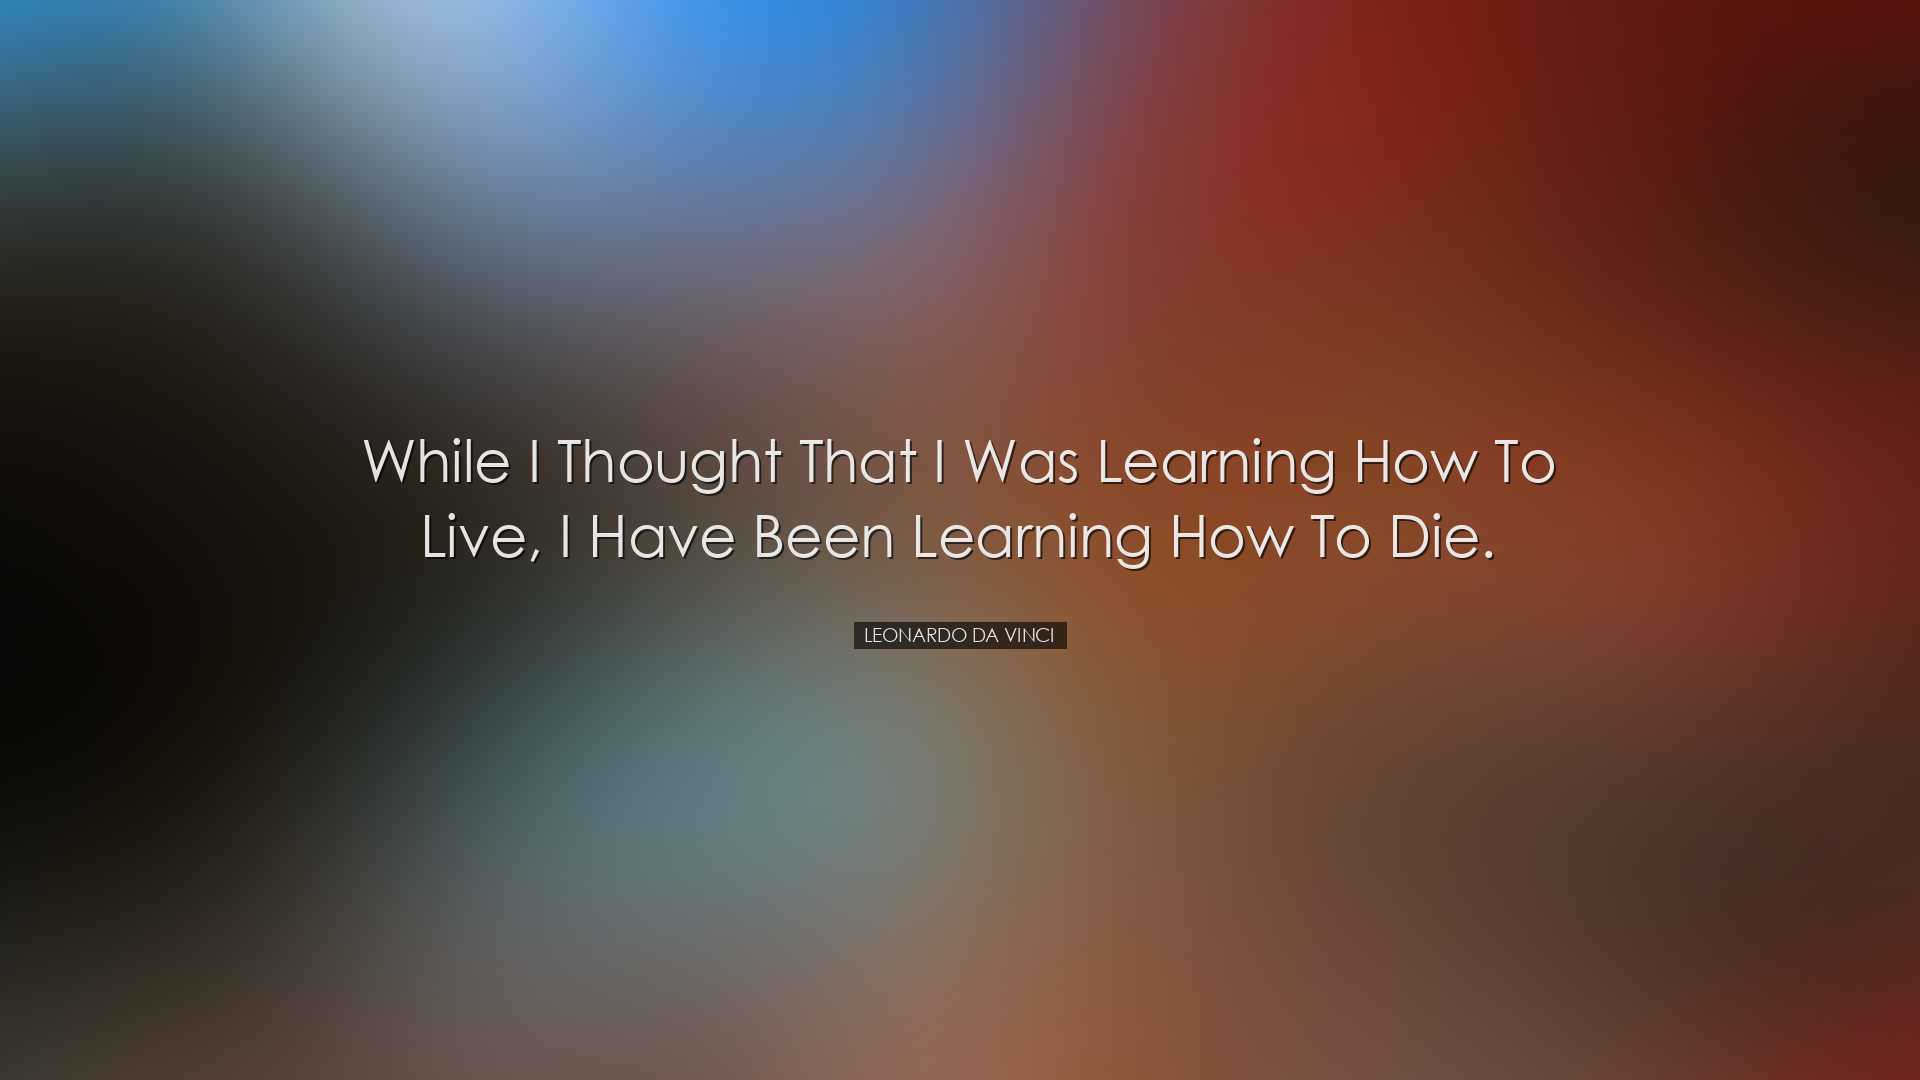 While I thought that I was learning how to live, I have been learn